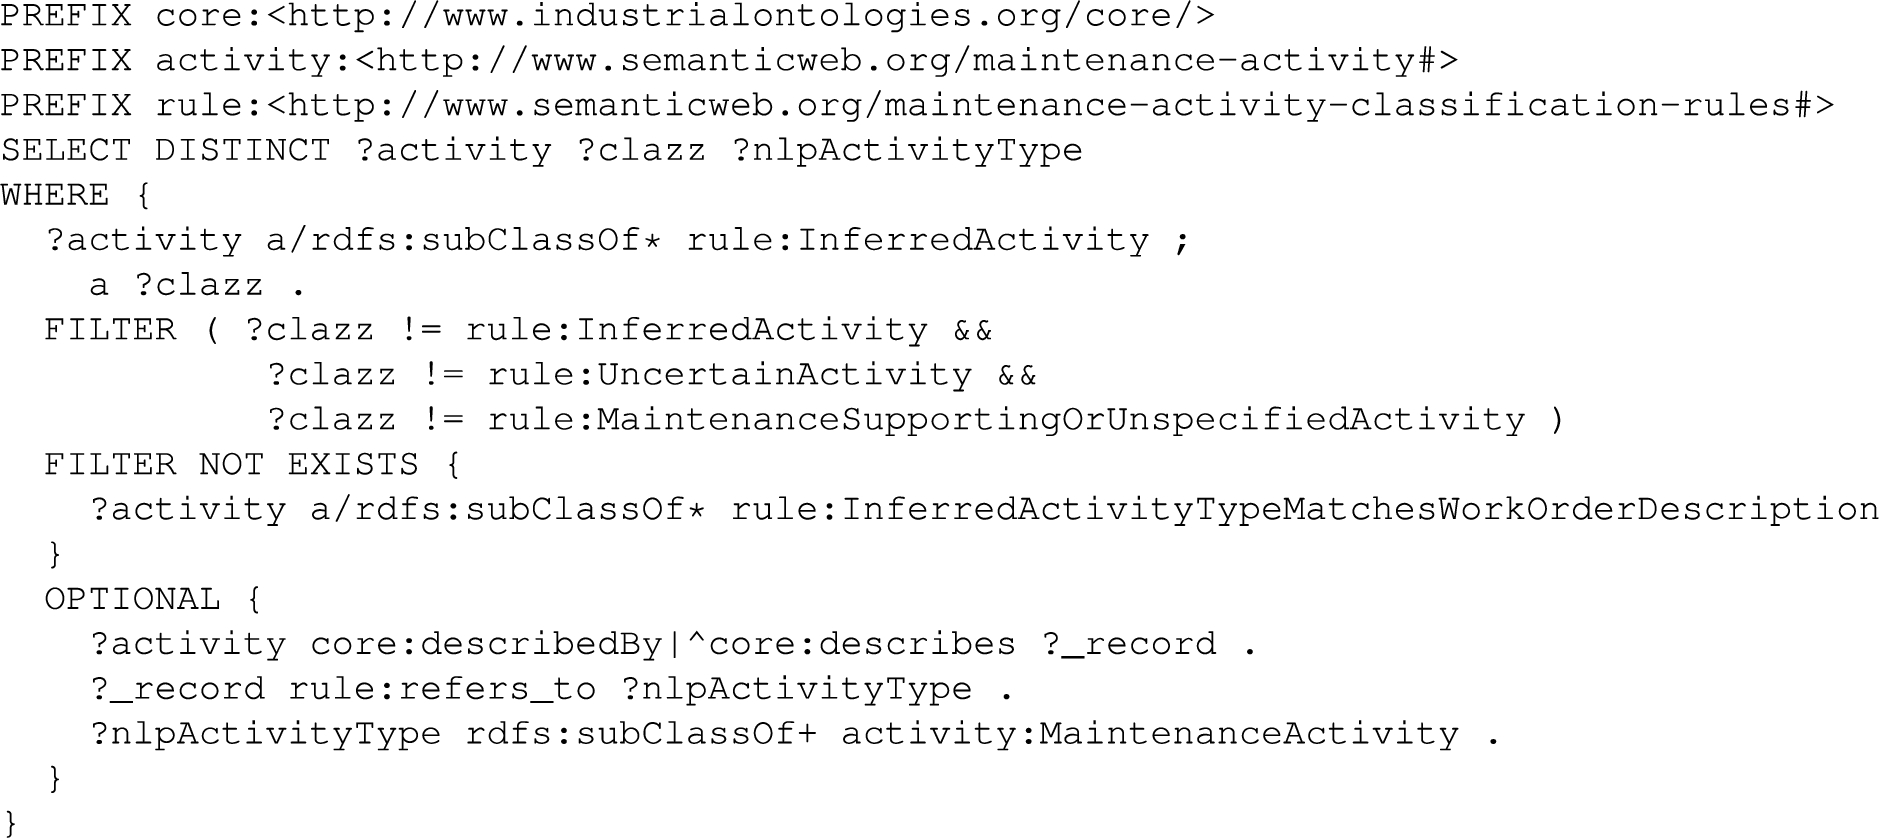 SPARQL Query for retrieving the activities that did not match the NLP Identified Activity type.